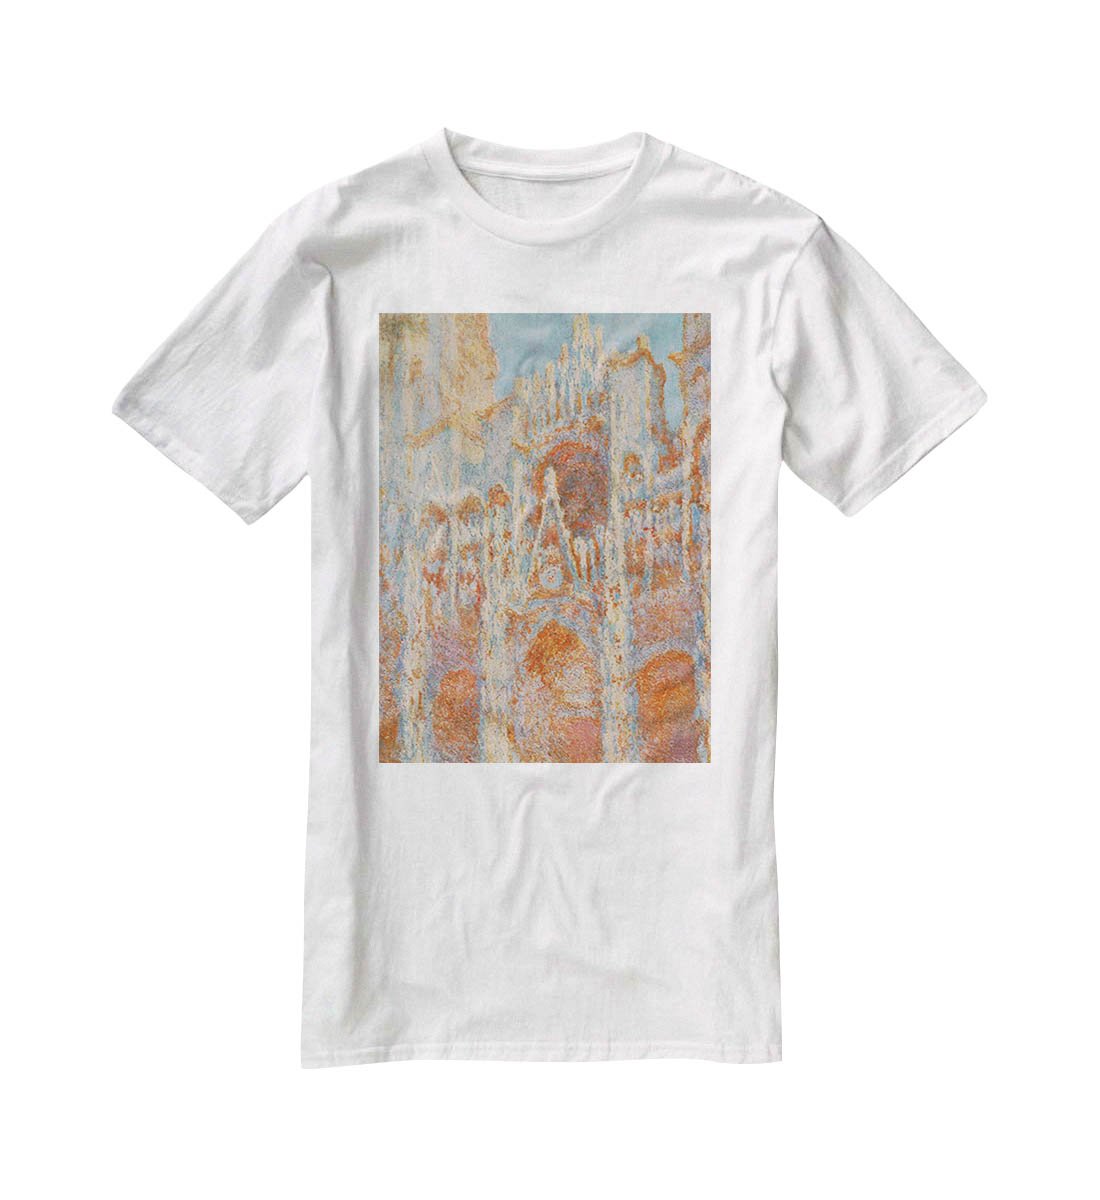 The Rouen Cathedral The facade at sunset by Monet T-Shirt - Canvas Art Rocks - 5